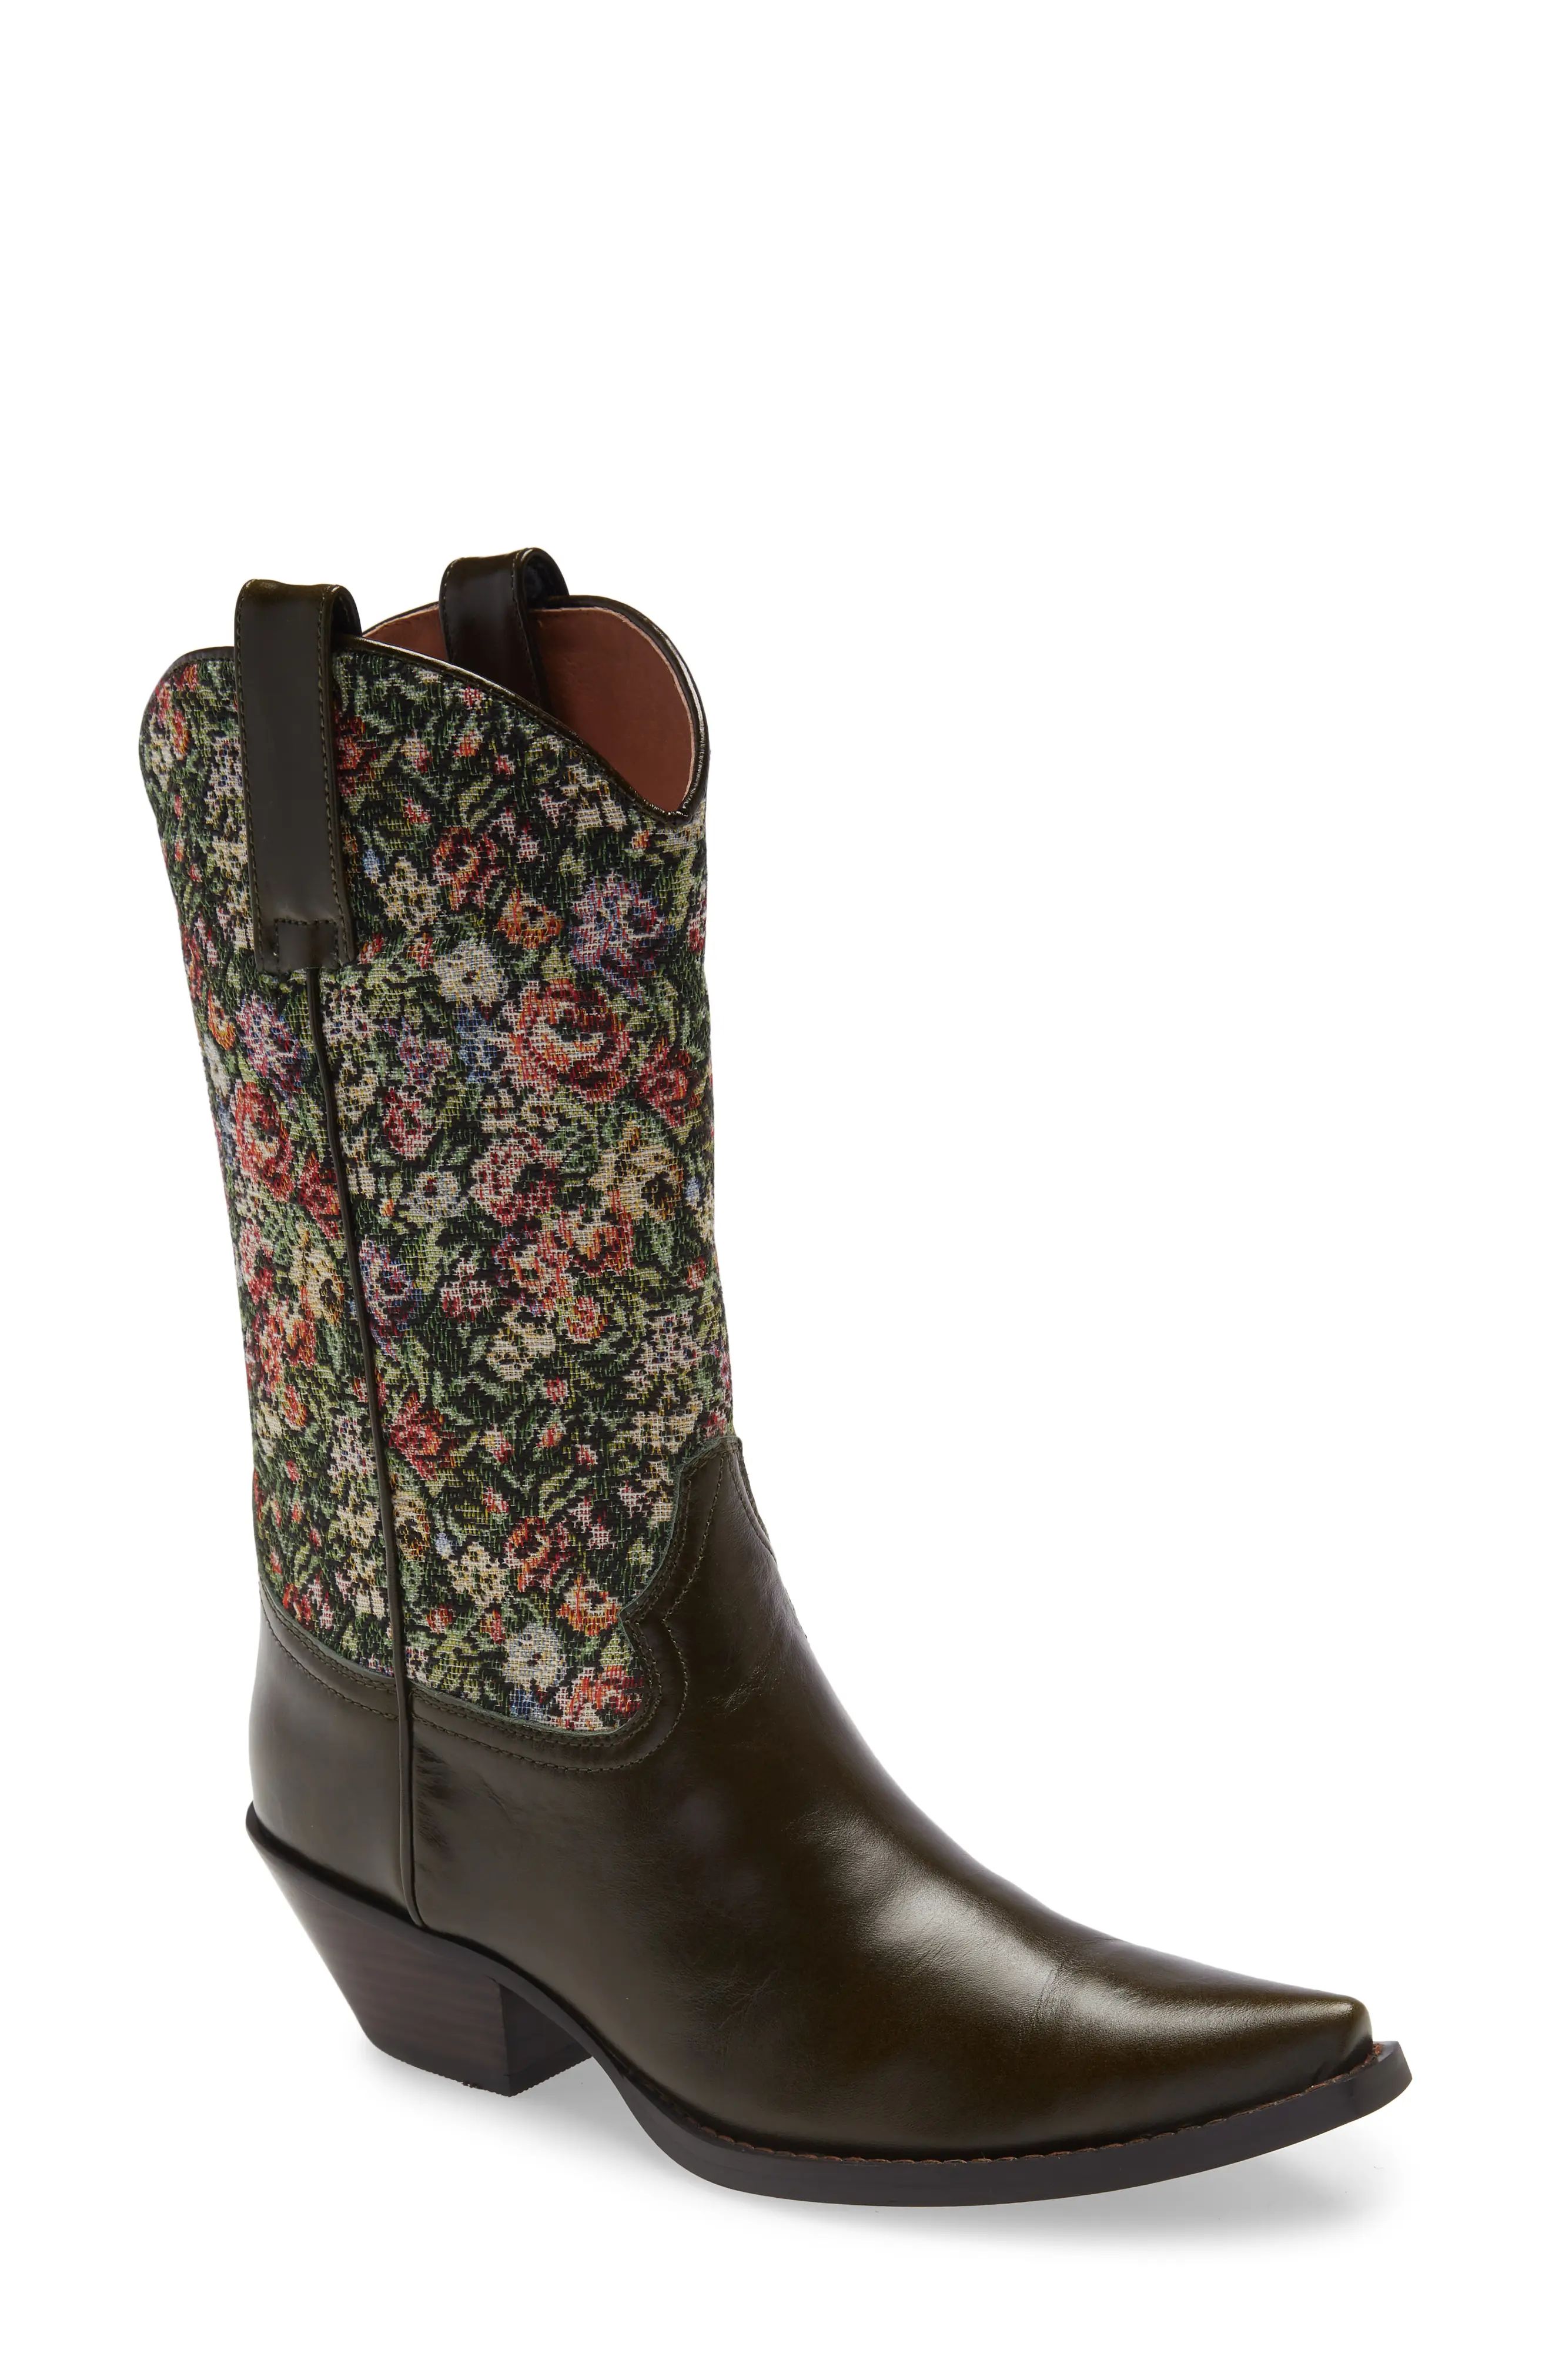 Jeffrey Campbell Crossroads Western Boot in Khaki Multi Floral Tapestry at Nordstrom, Size 5 | Nordstrom